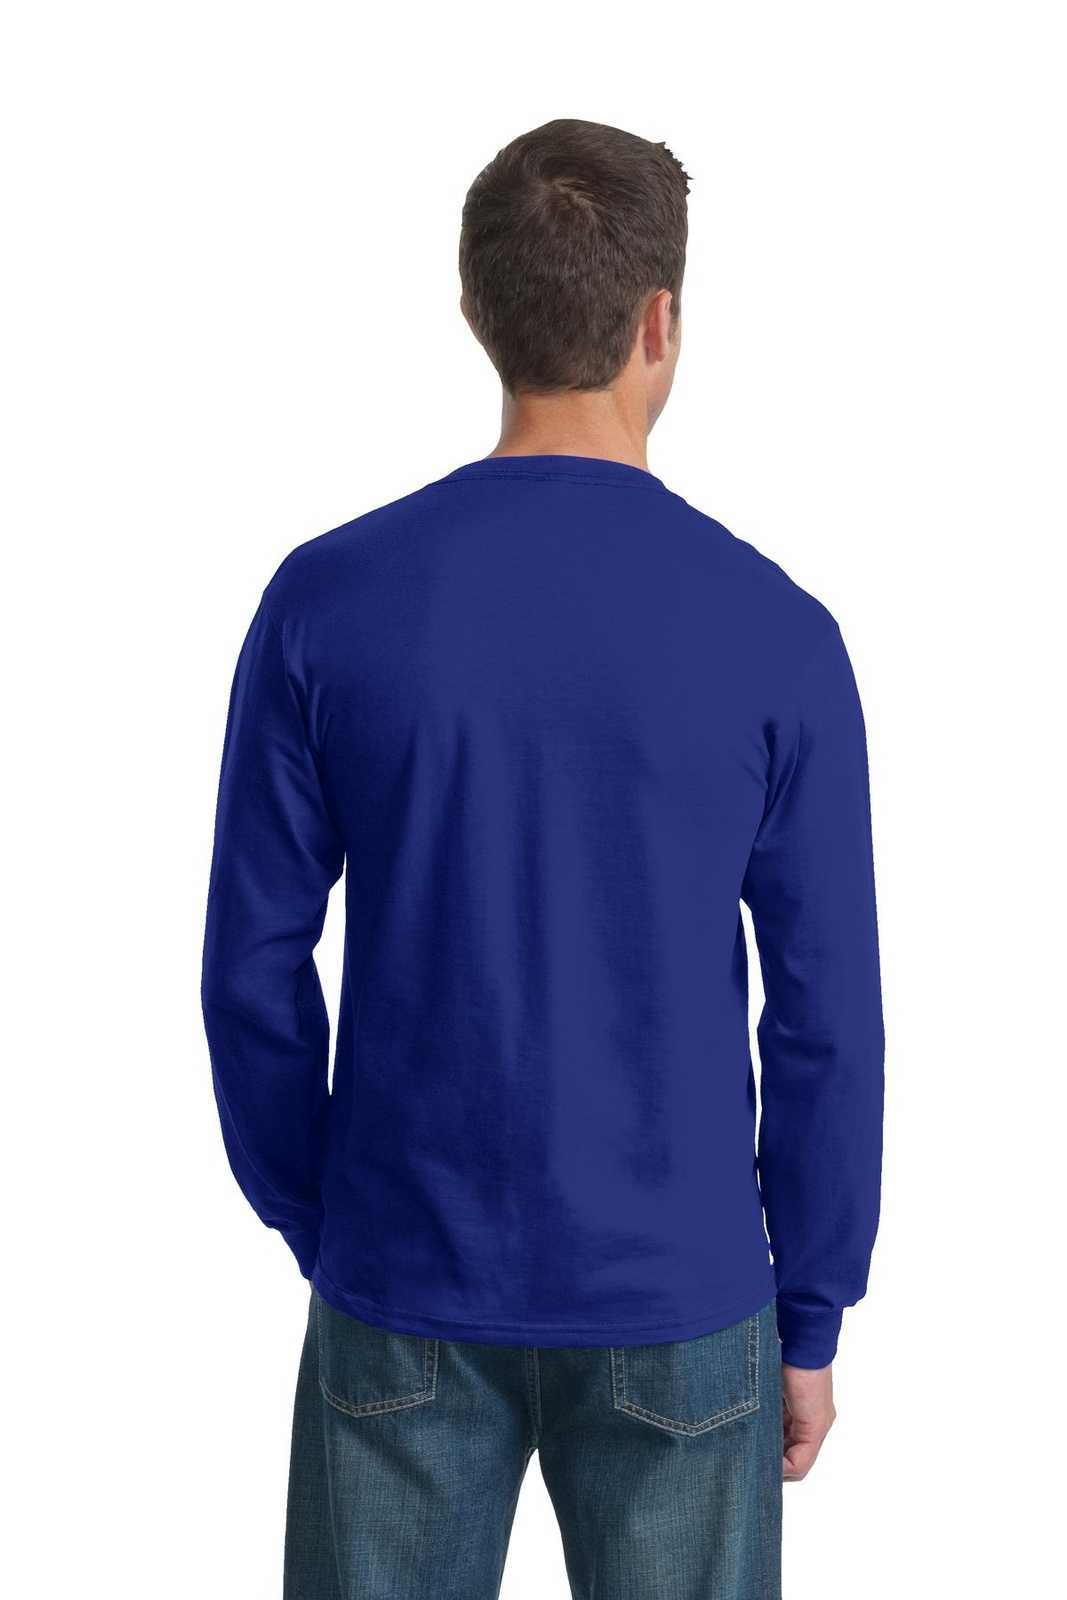 Fruit of the Loom 4930 HD Cotton 100% Cotton Long Sleeve T-Shirt - Royal - HIT a Double